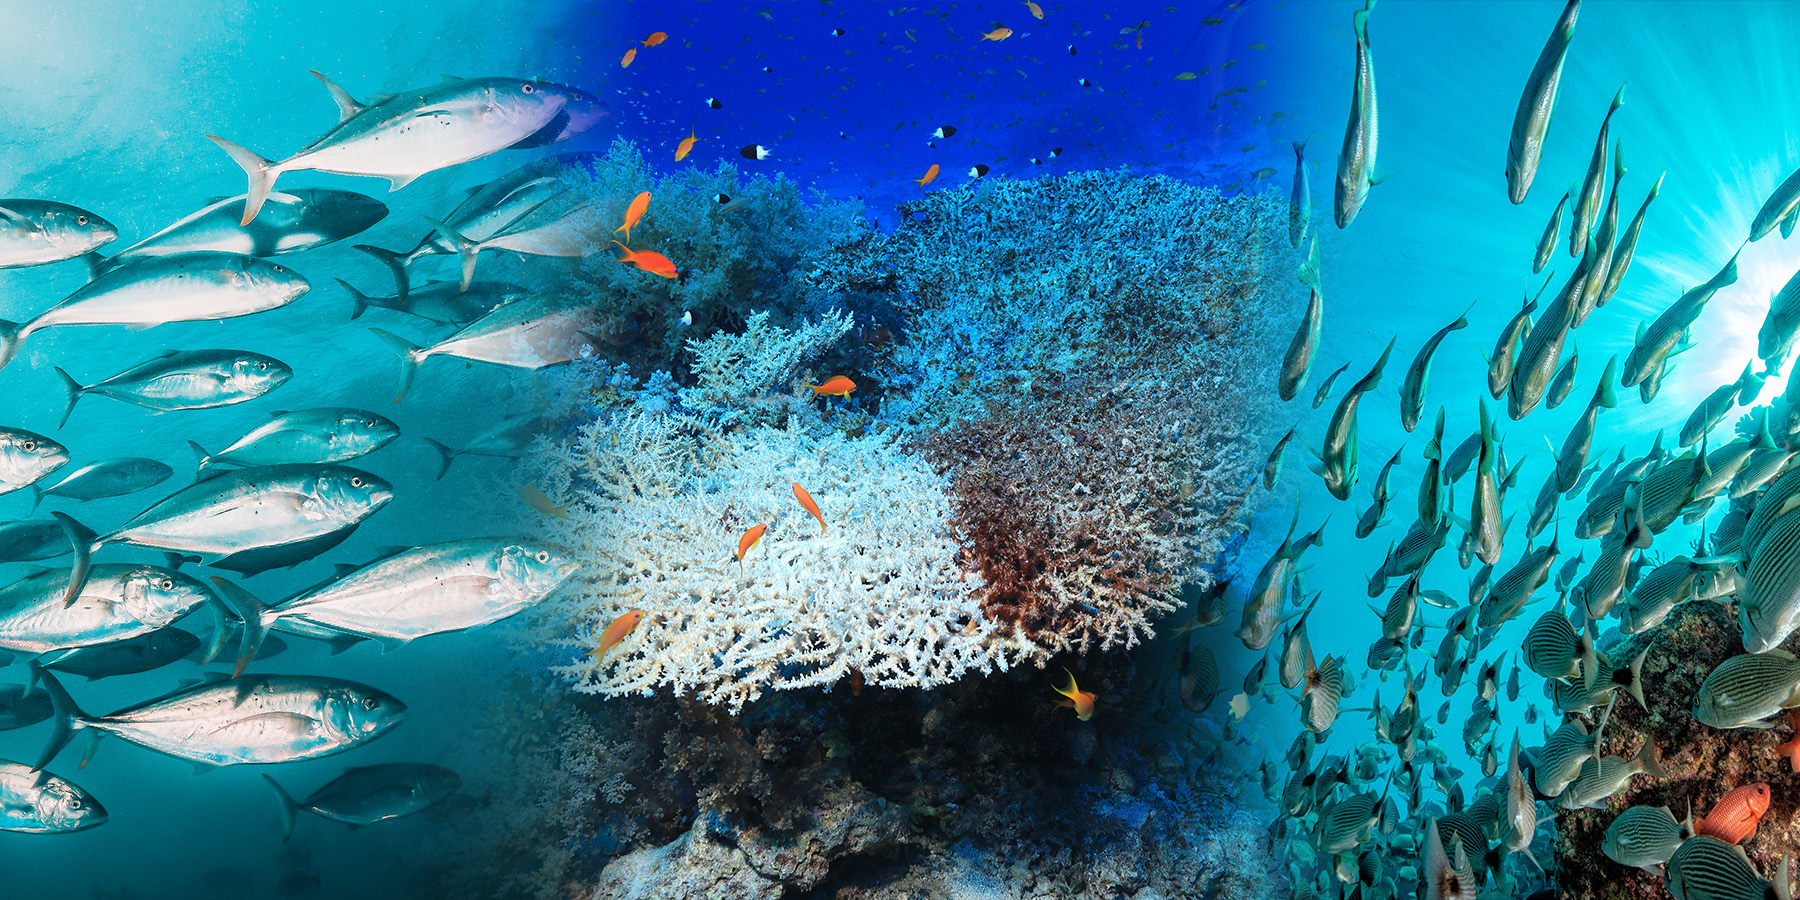 Image of a school of fish, a coral reef, and another school of fish.